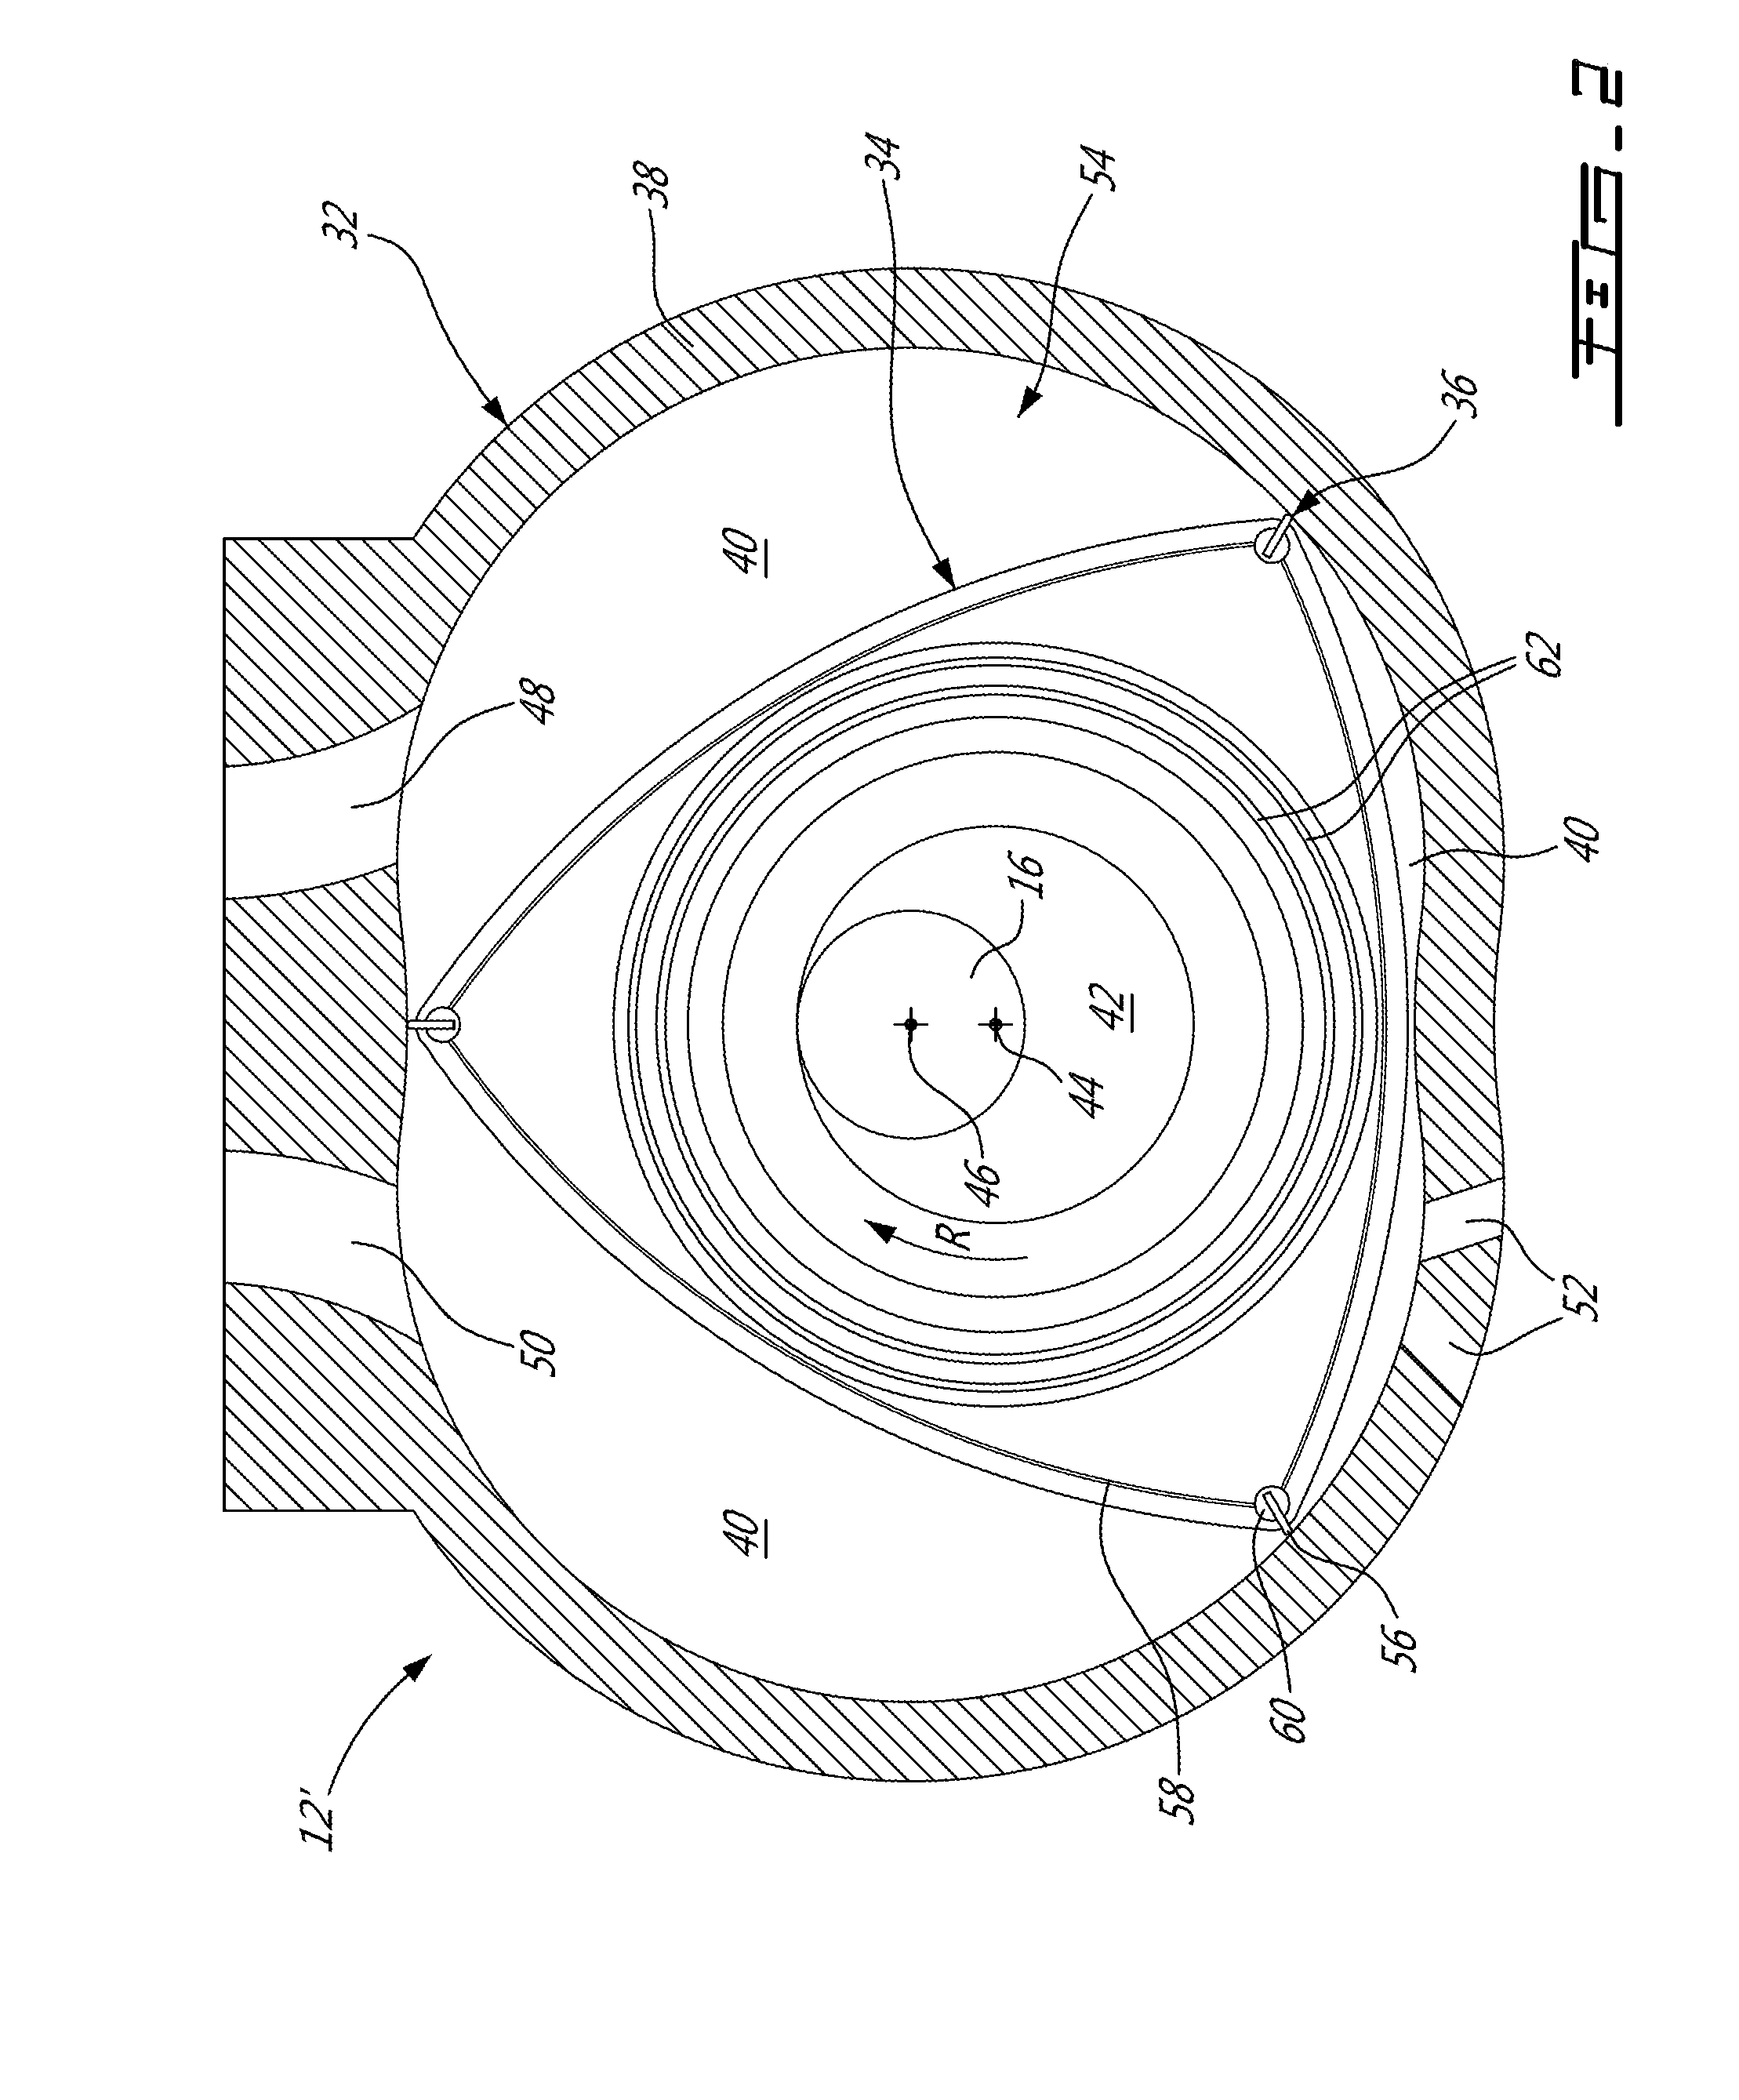 Compound engine assembly with offset turbine shaft, engine shaft and inlet duct